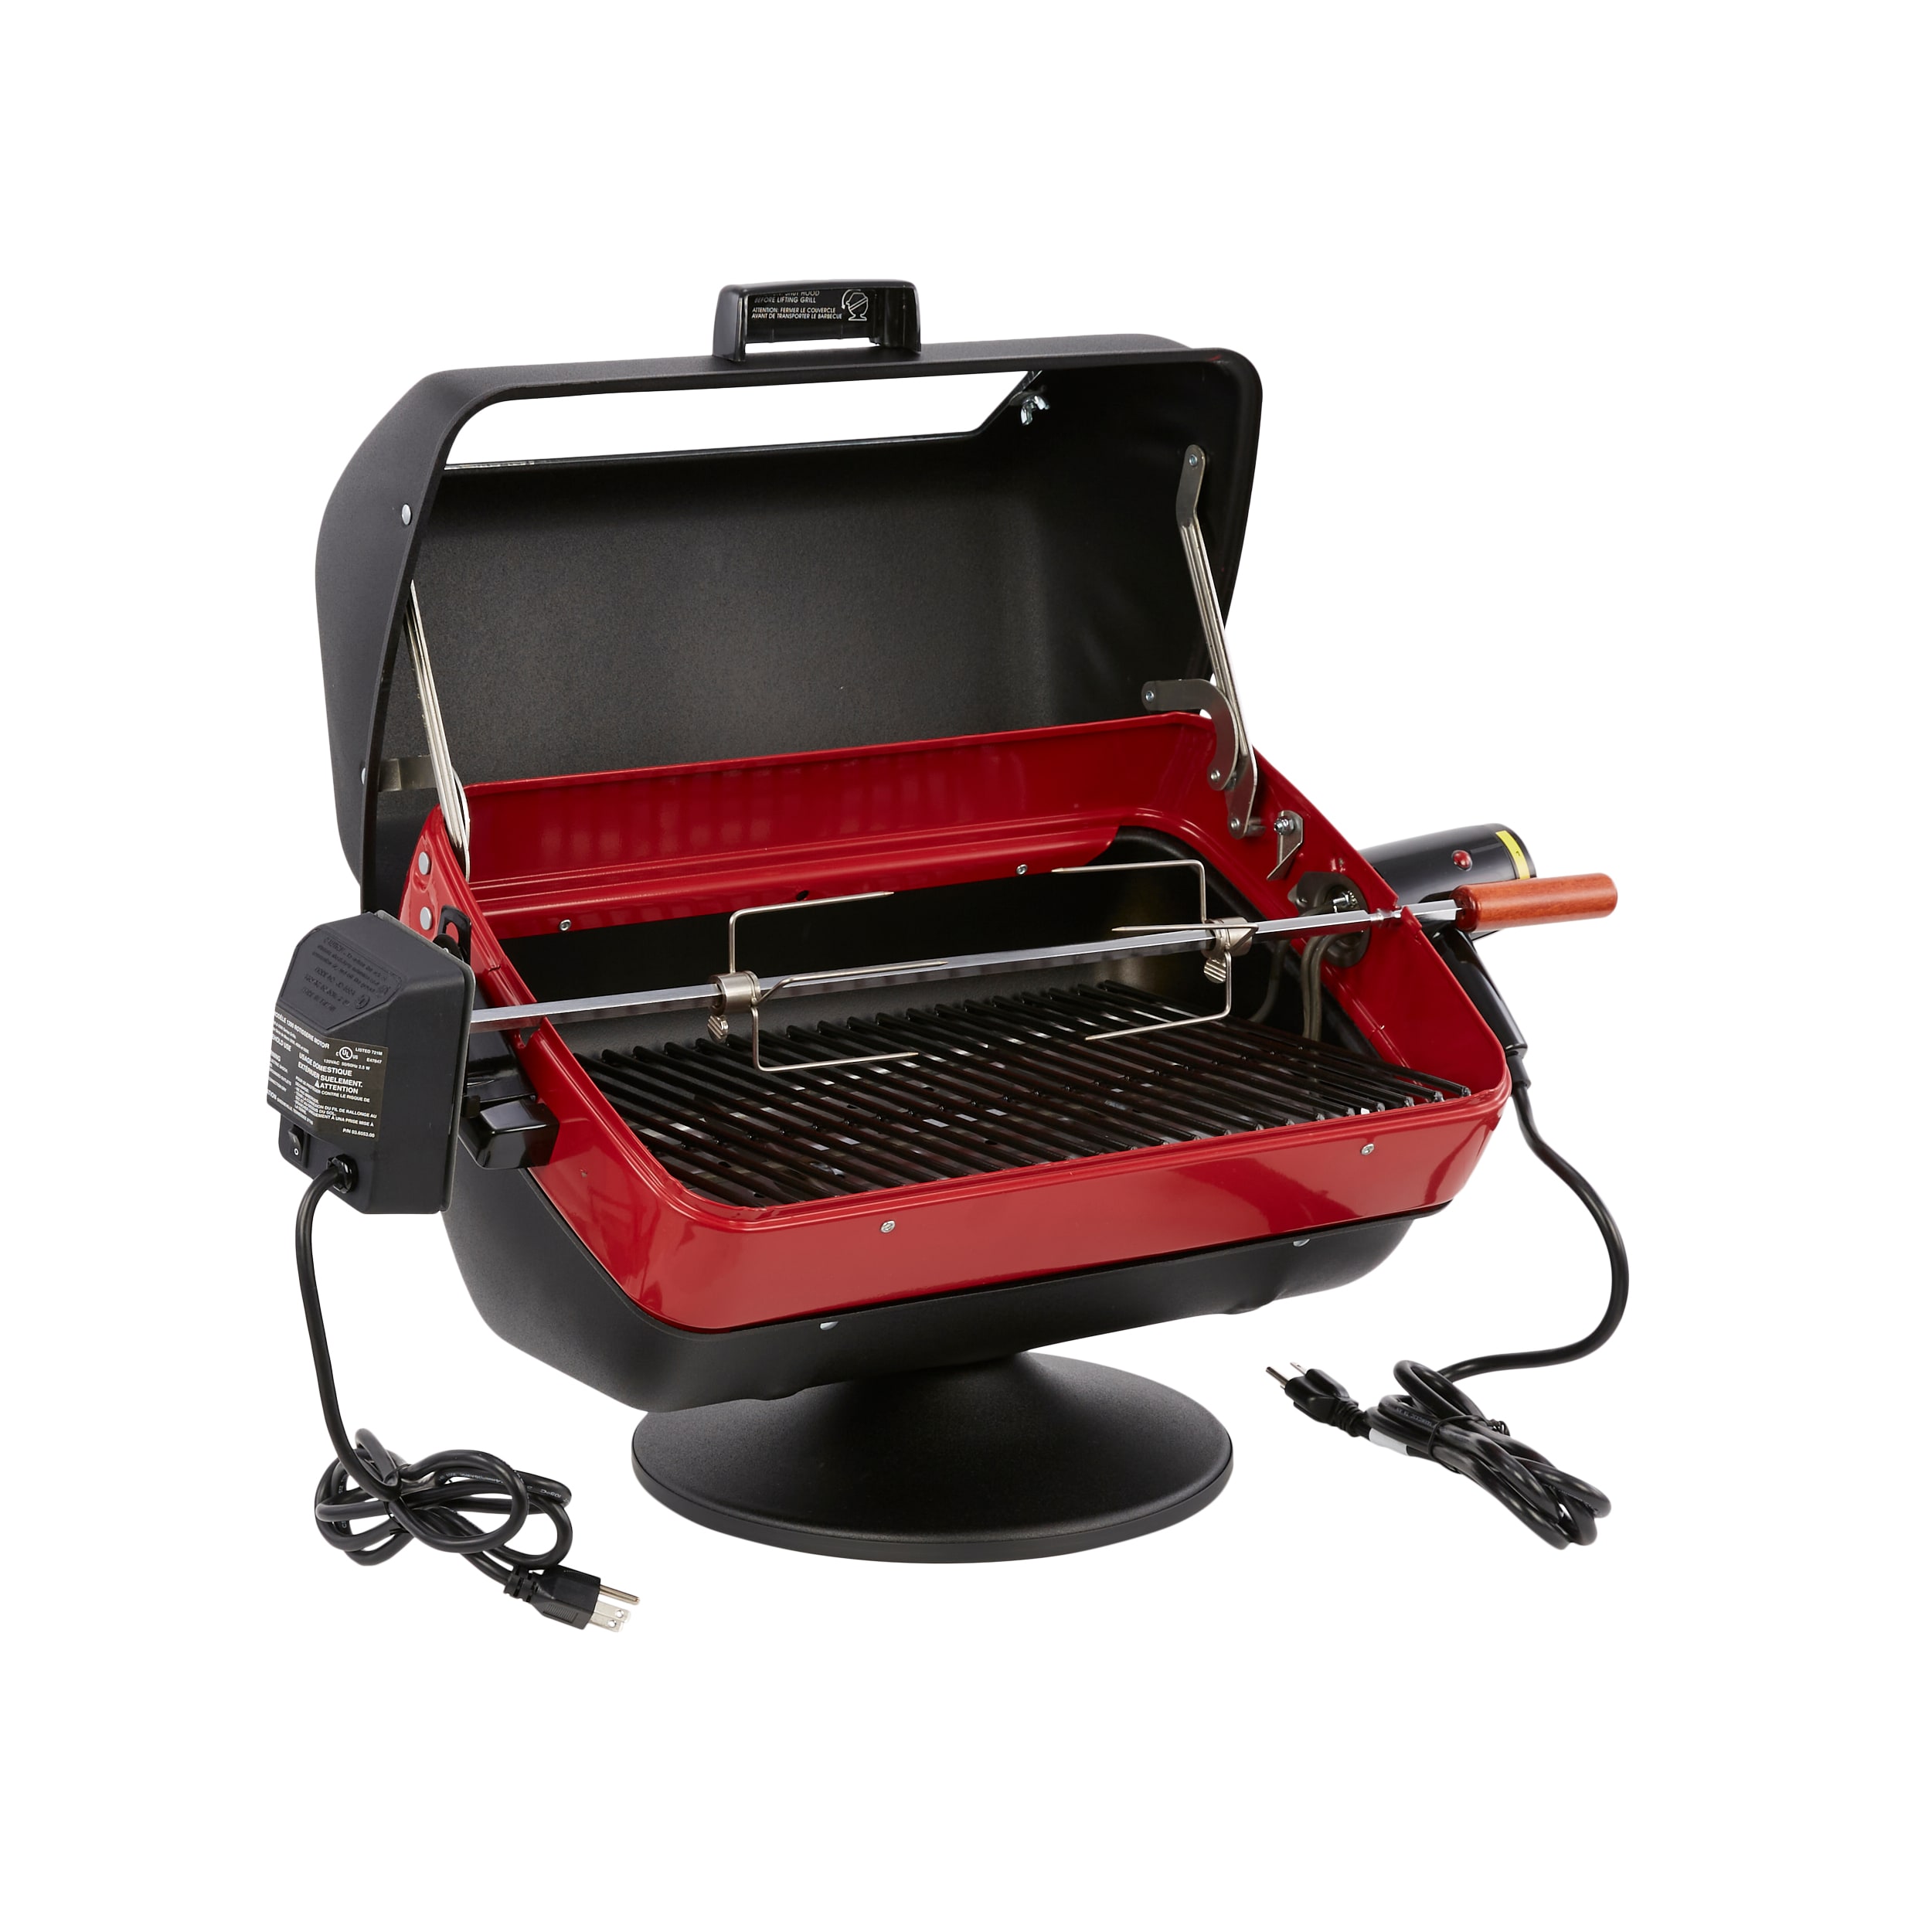 Americana Electric Tabletop Grill with 3-position element-Model 9300U8.181  - Americana Grills